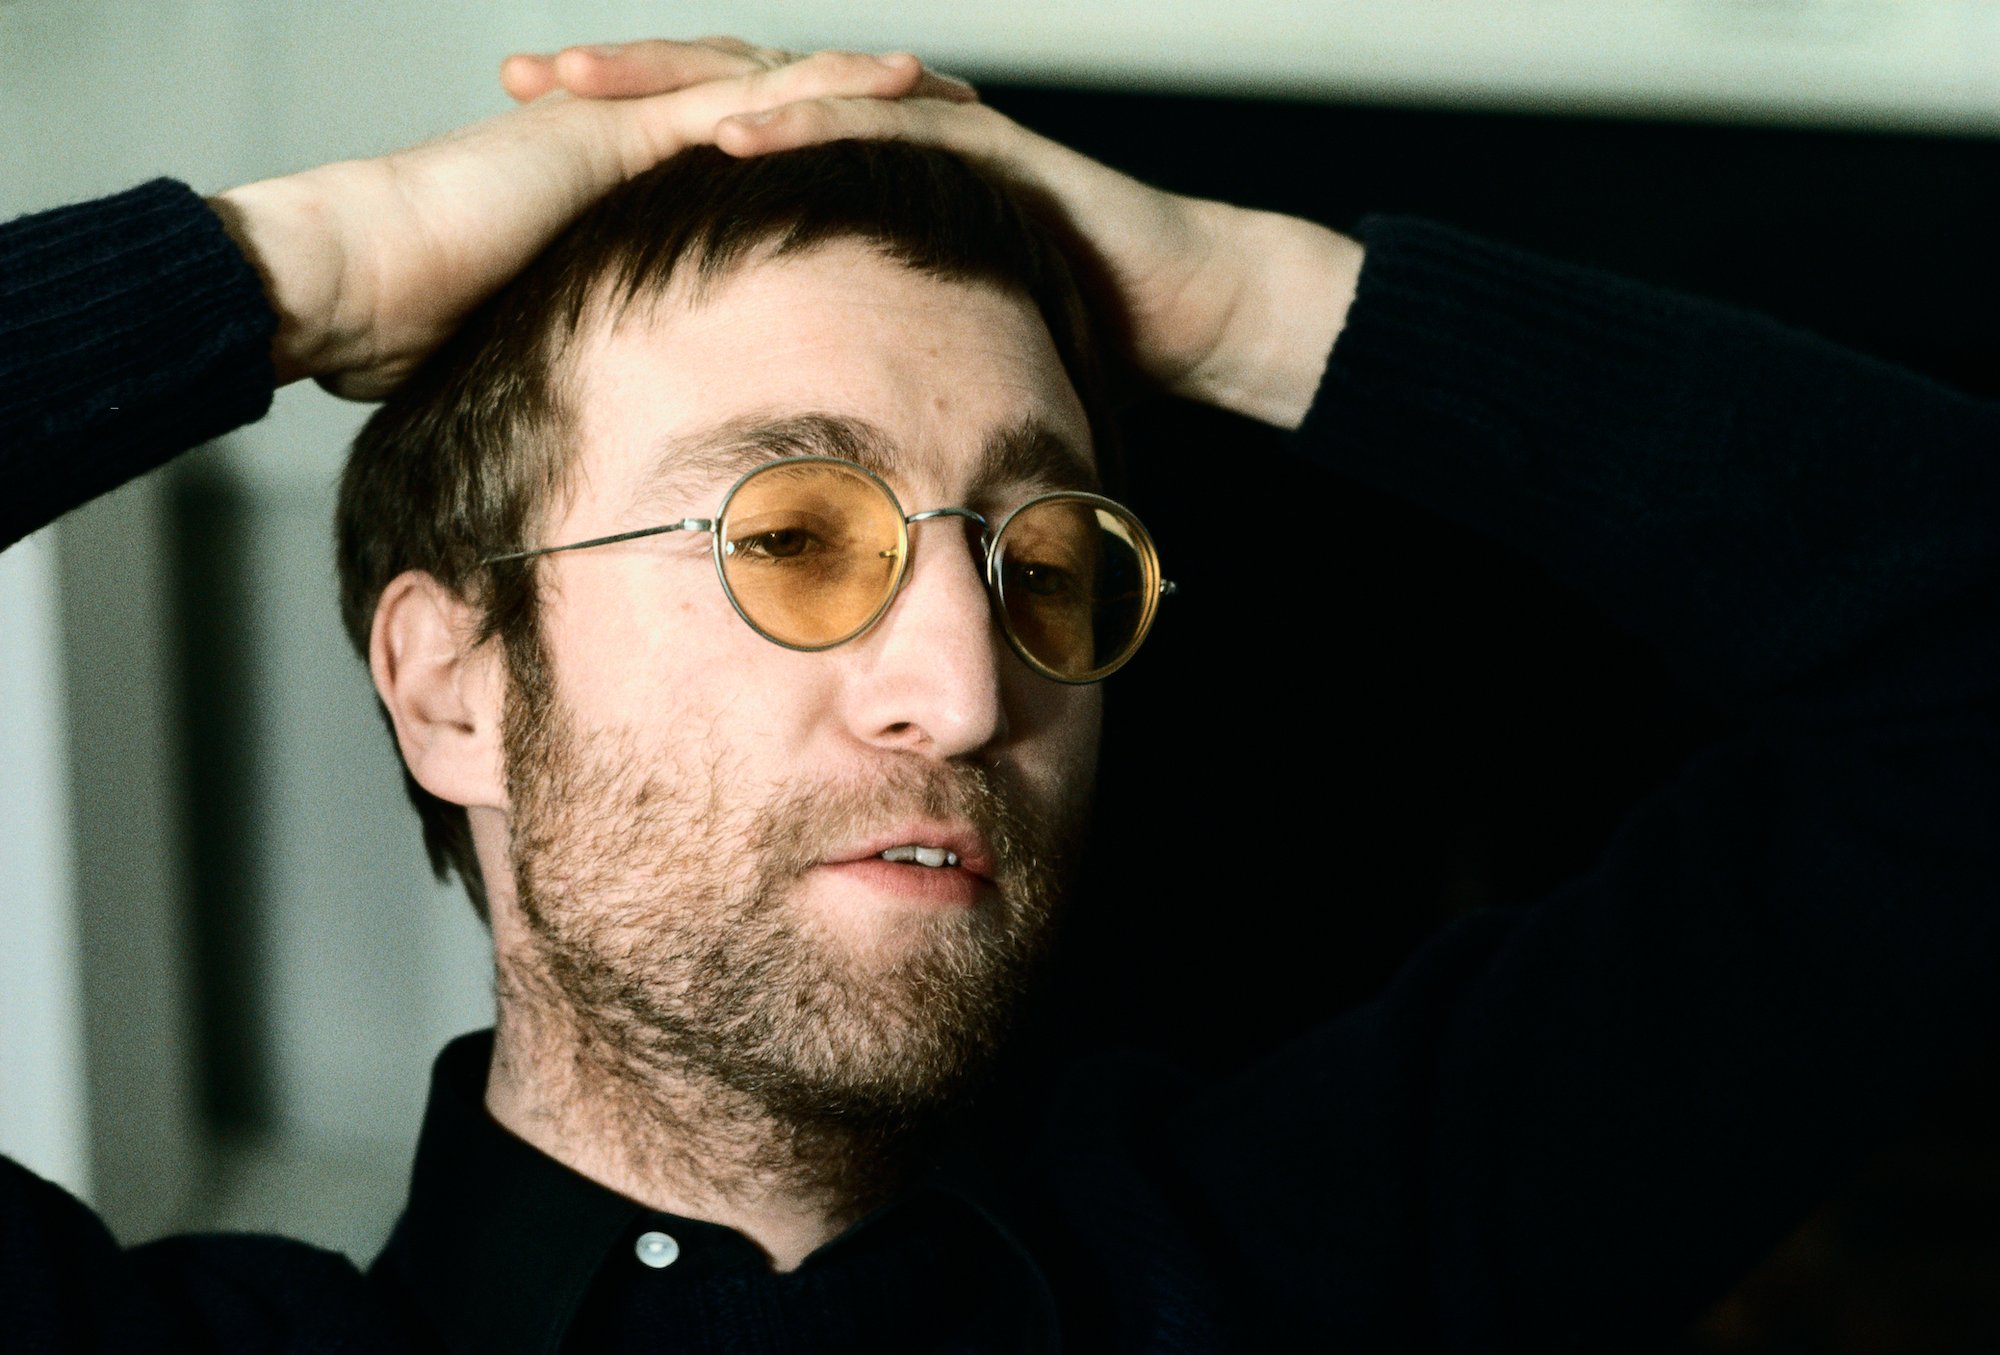 John Lennon wearing yellow glasses with his hands on his hand